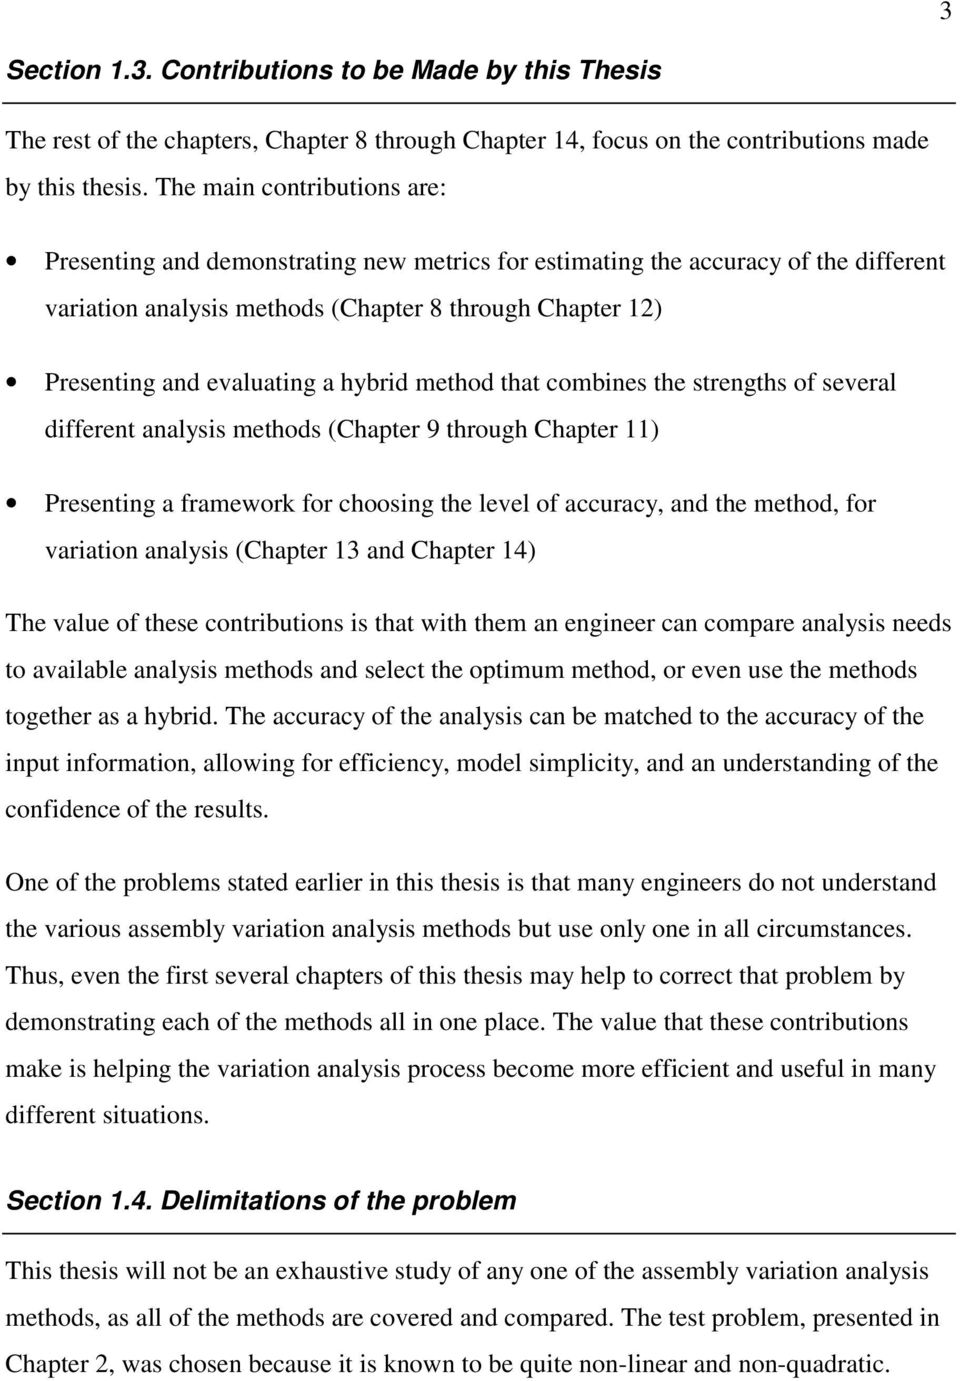 that combnes the strengths of several dfferent analyss methods (Chapter 9 through Chapter ) Presentng a framework for choosng the level of accuracy, and the method, for varaton analyss (Chapter 3 and